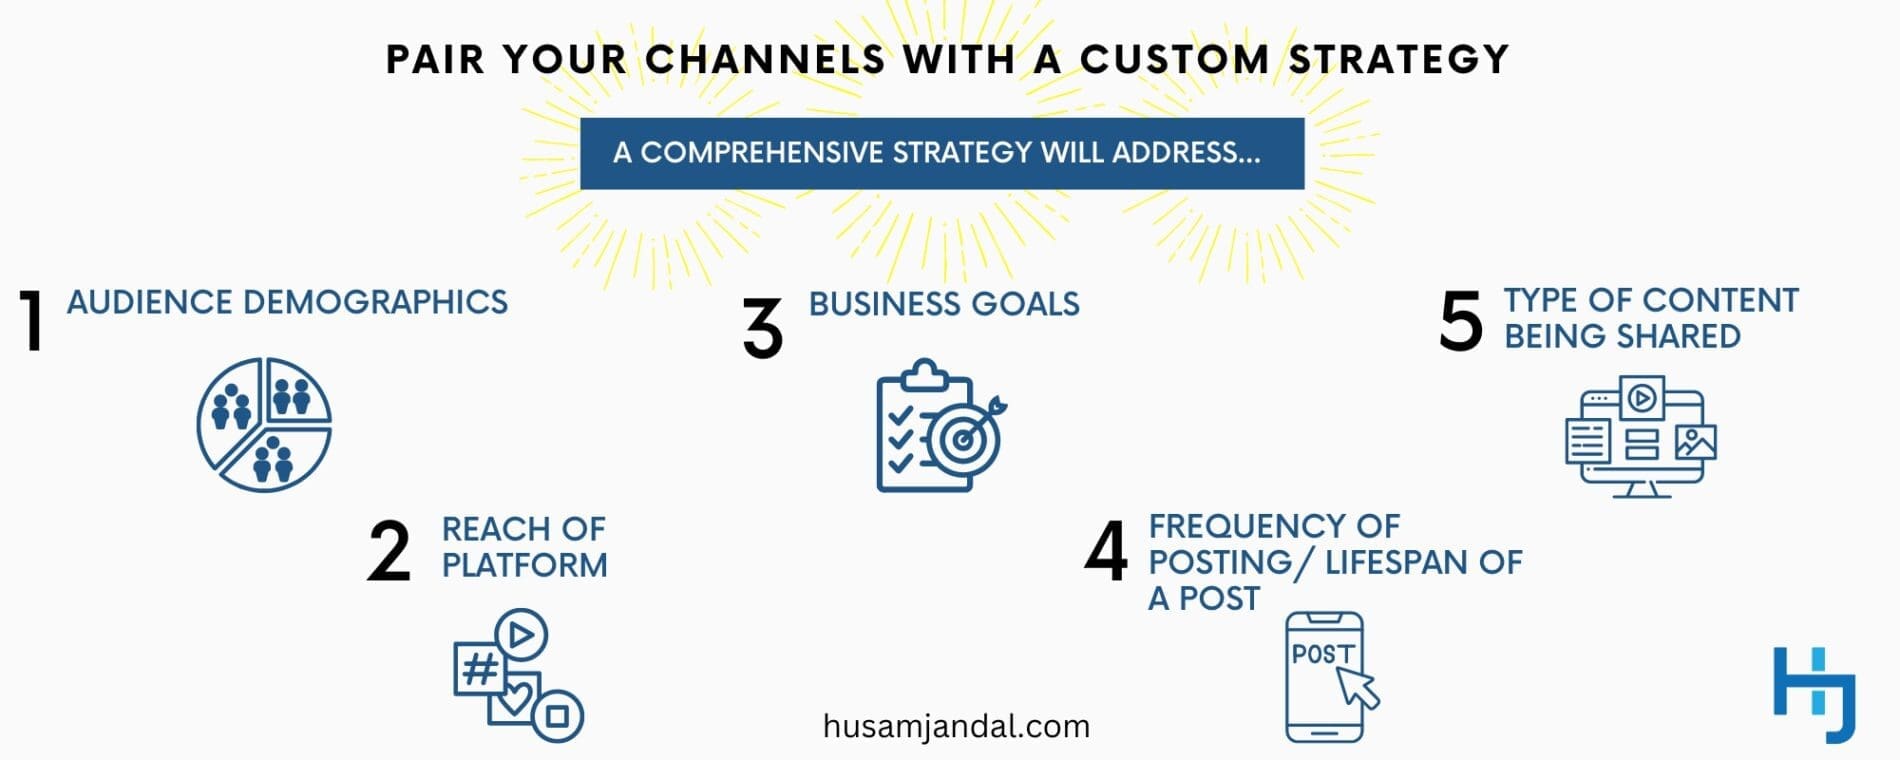 Pair Your Channels with a Custom Strategy